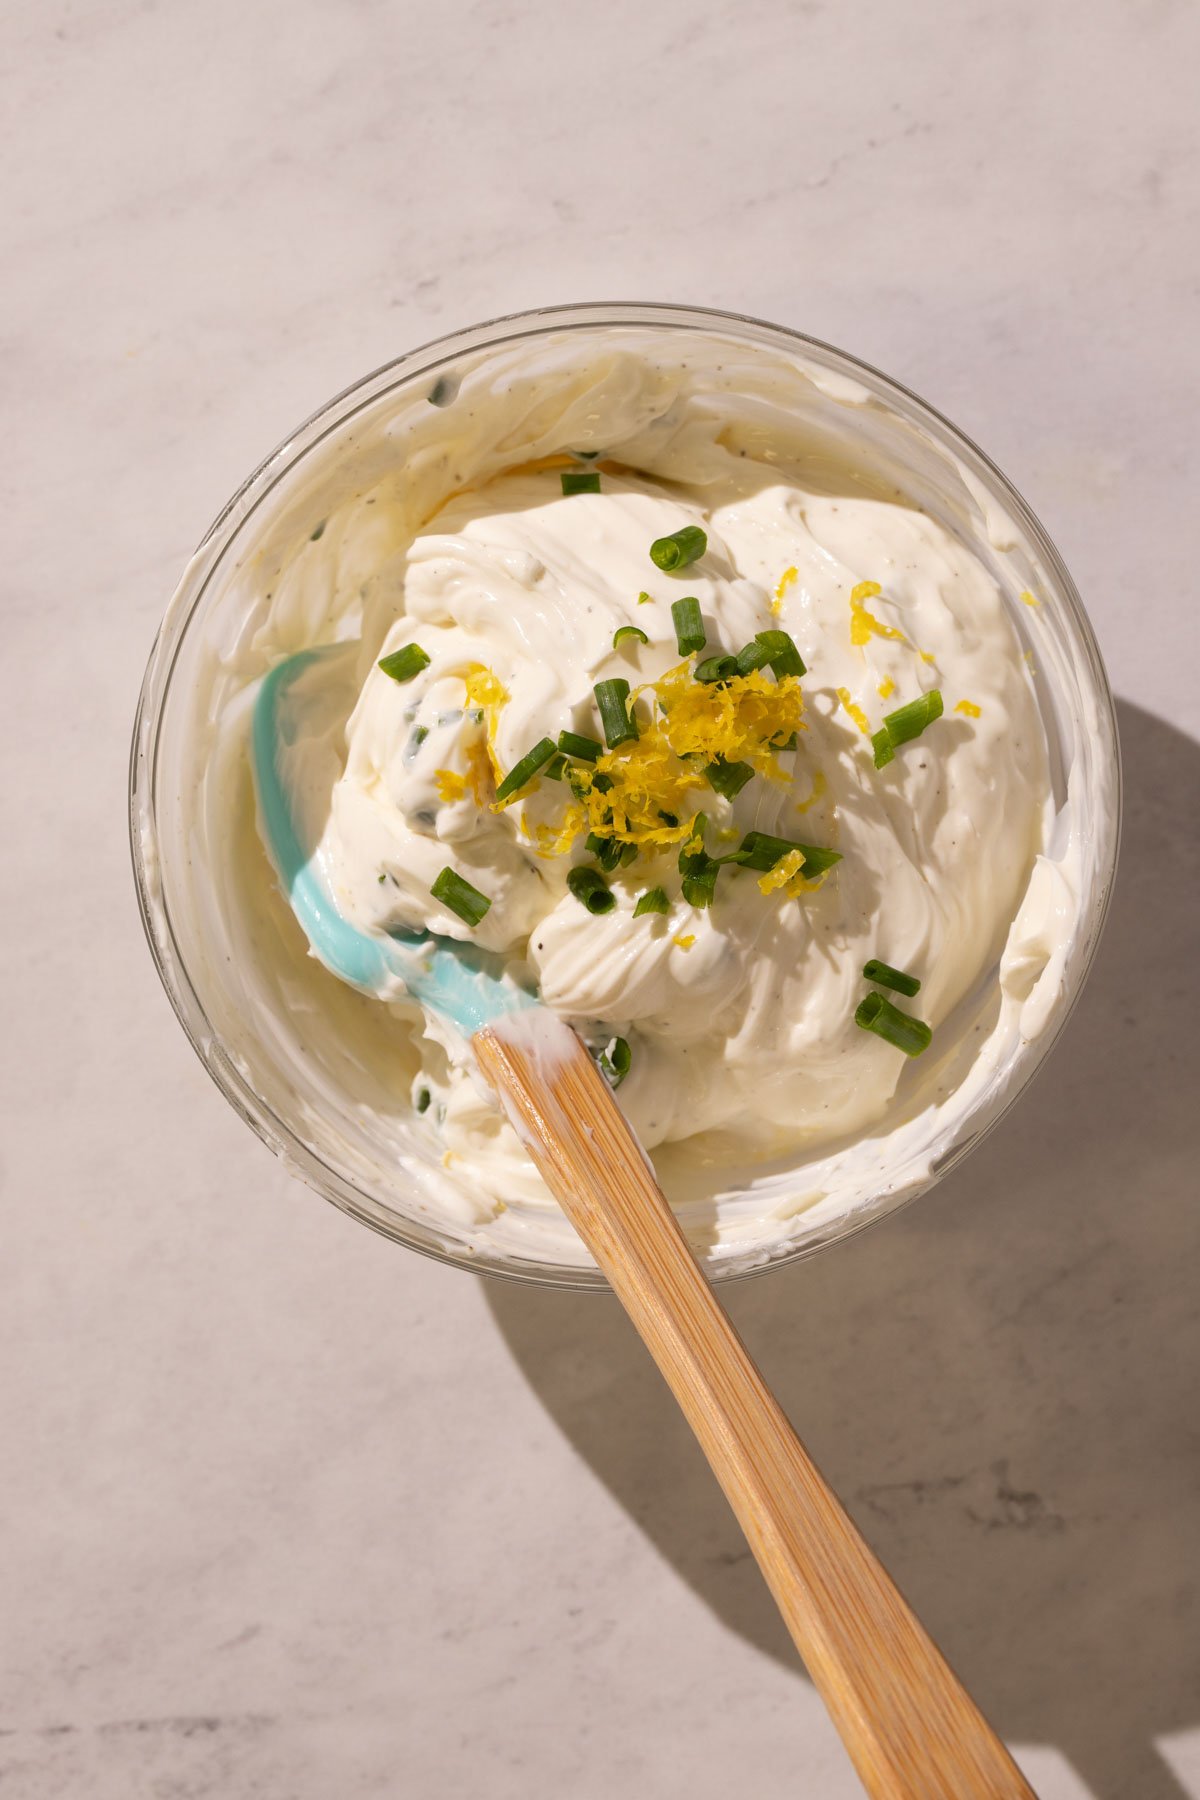 A small bowl of cream cheese spread with fresh chives and lemon zest on top.